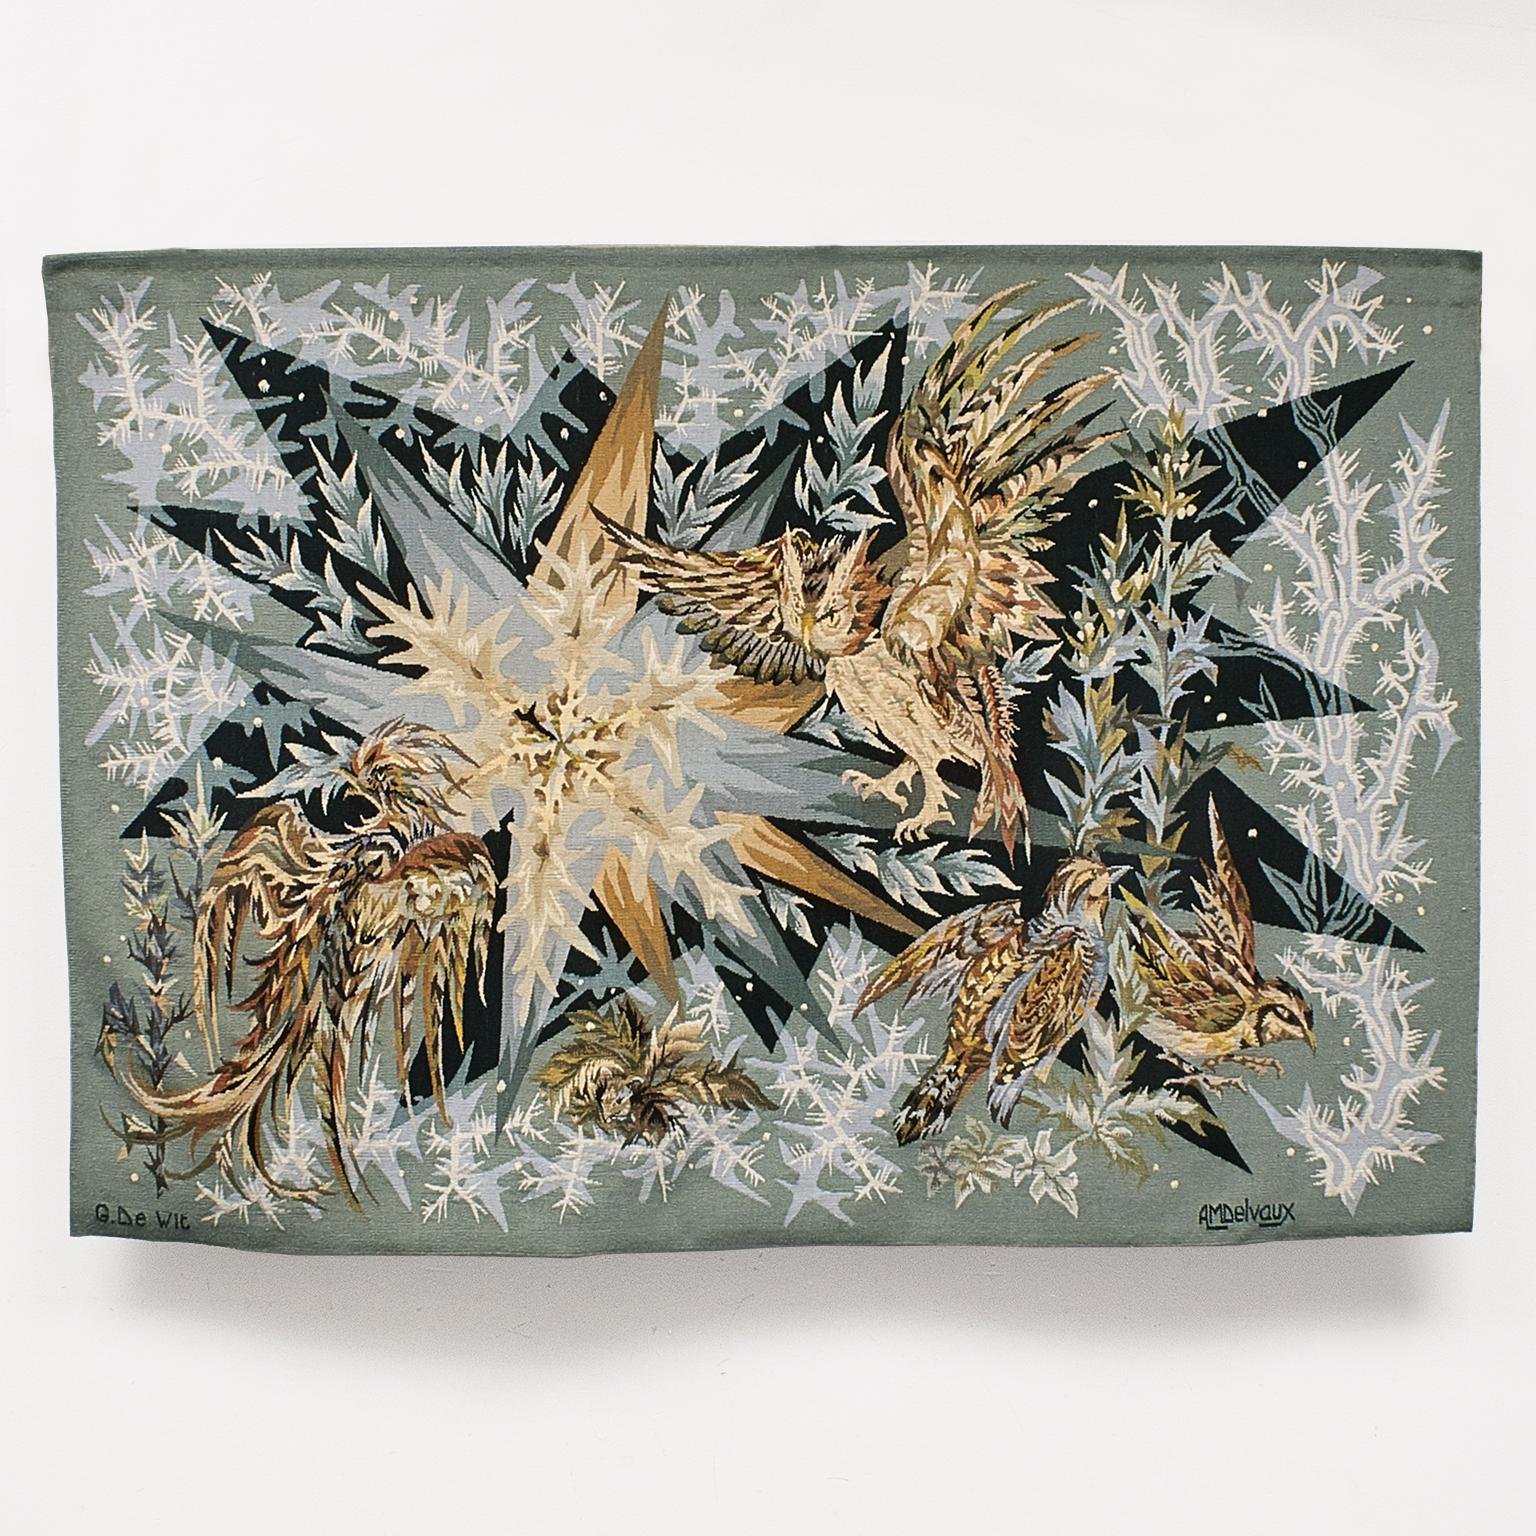 A 1950’s Belgium hand woven tapestry designed by Delvaux after artwork of Louis Dumont (Percenel). Made at one of Eruope’s most prestigious private tapestry works, Gaspard de Wit, in the Province of Antwerp. The partial abstract image is of a